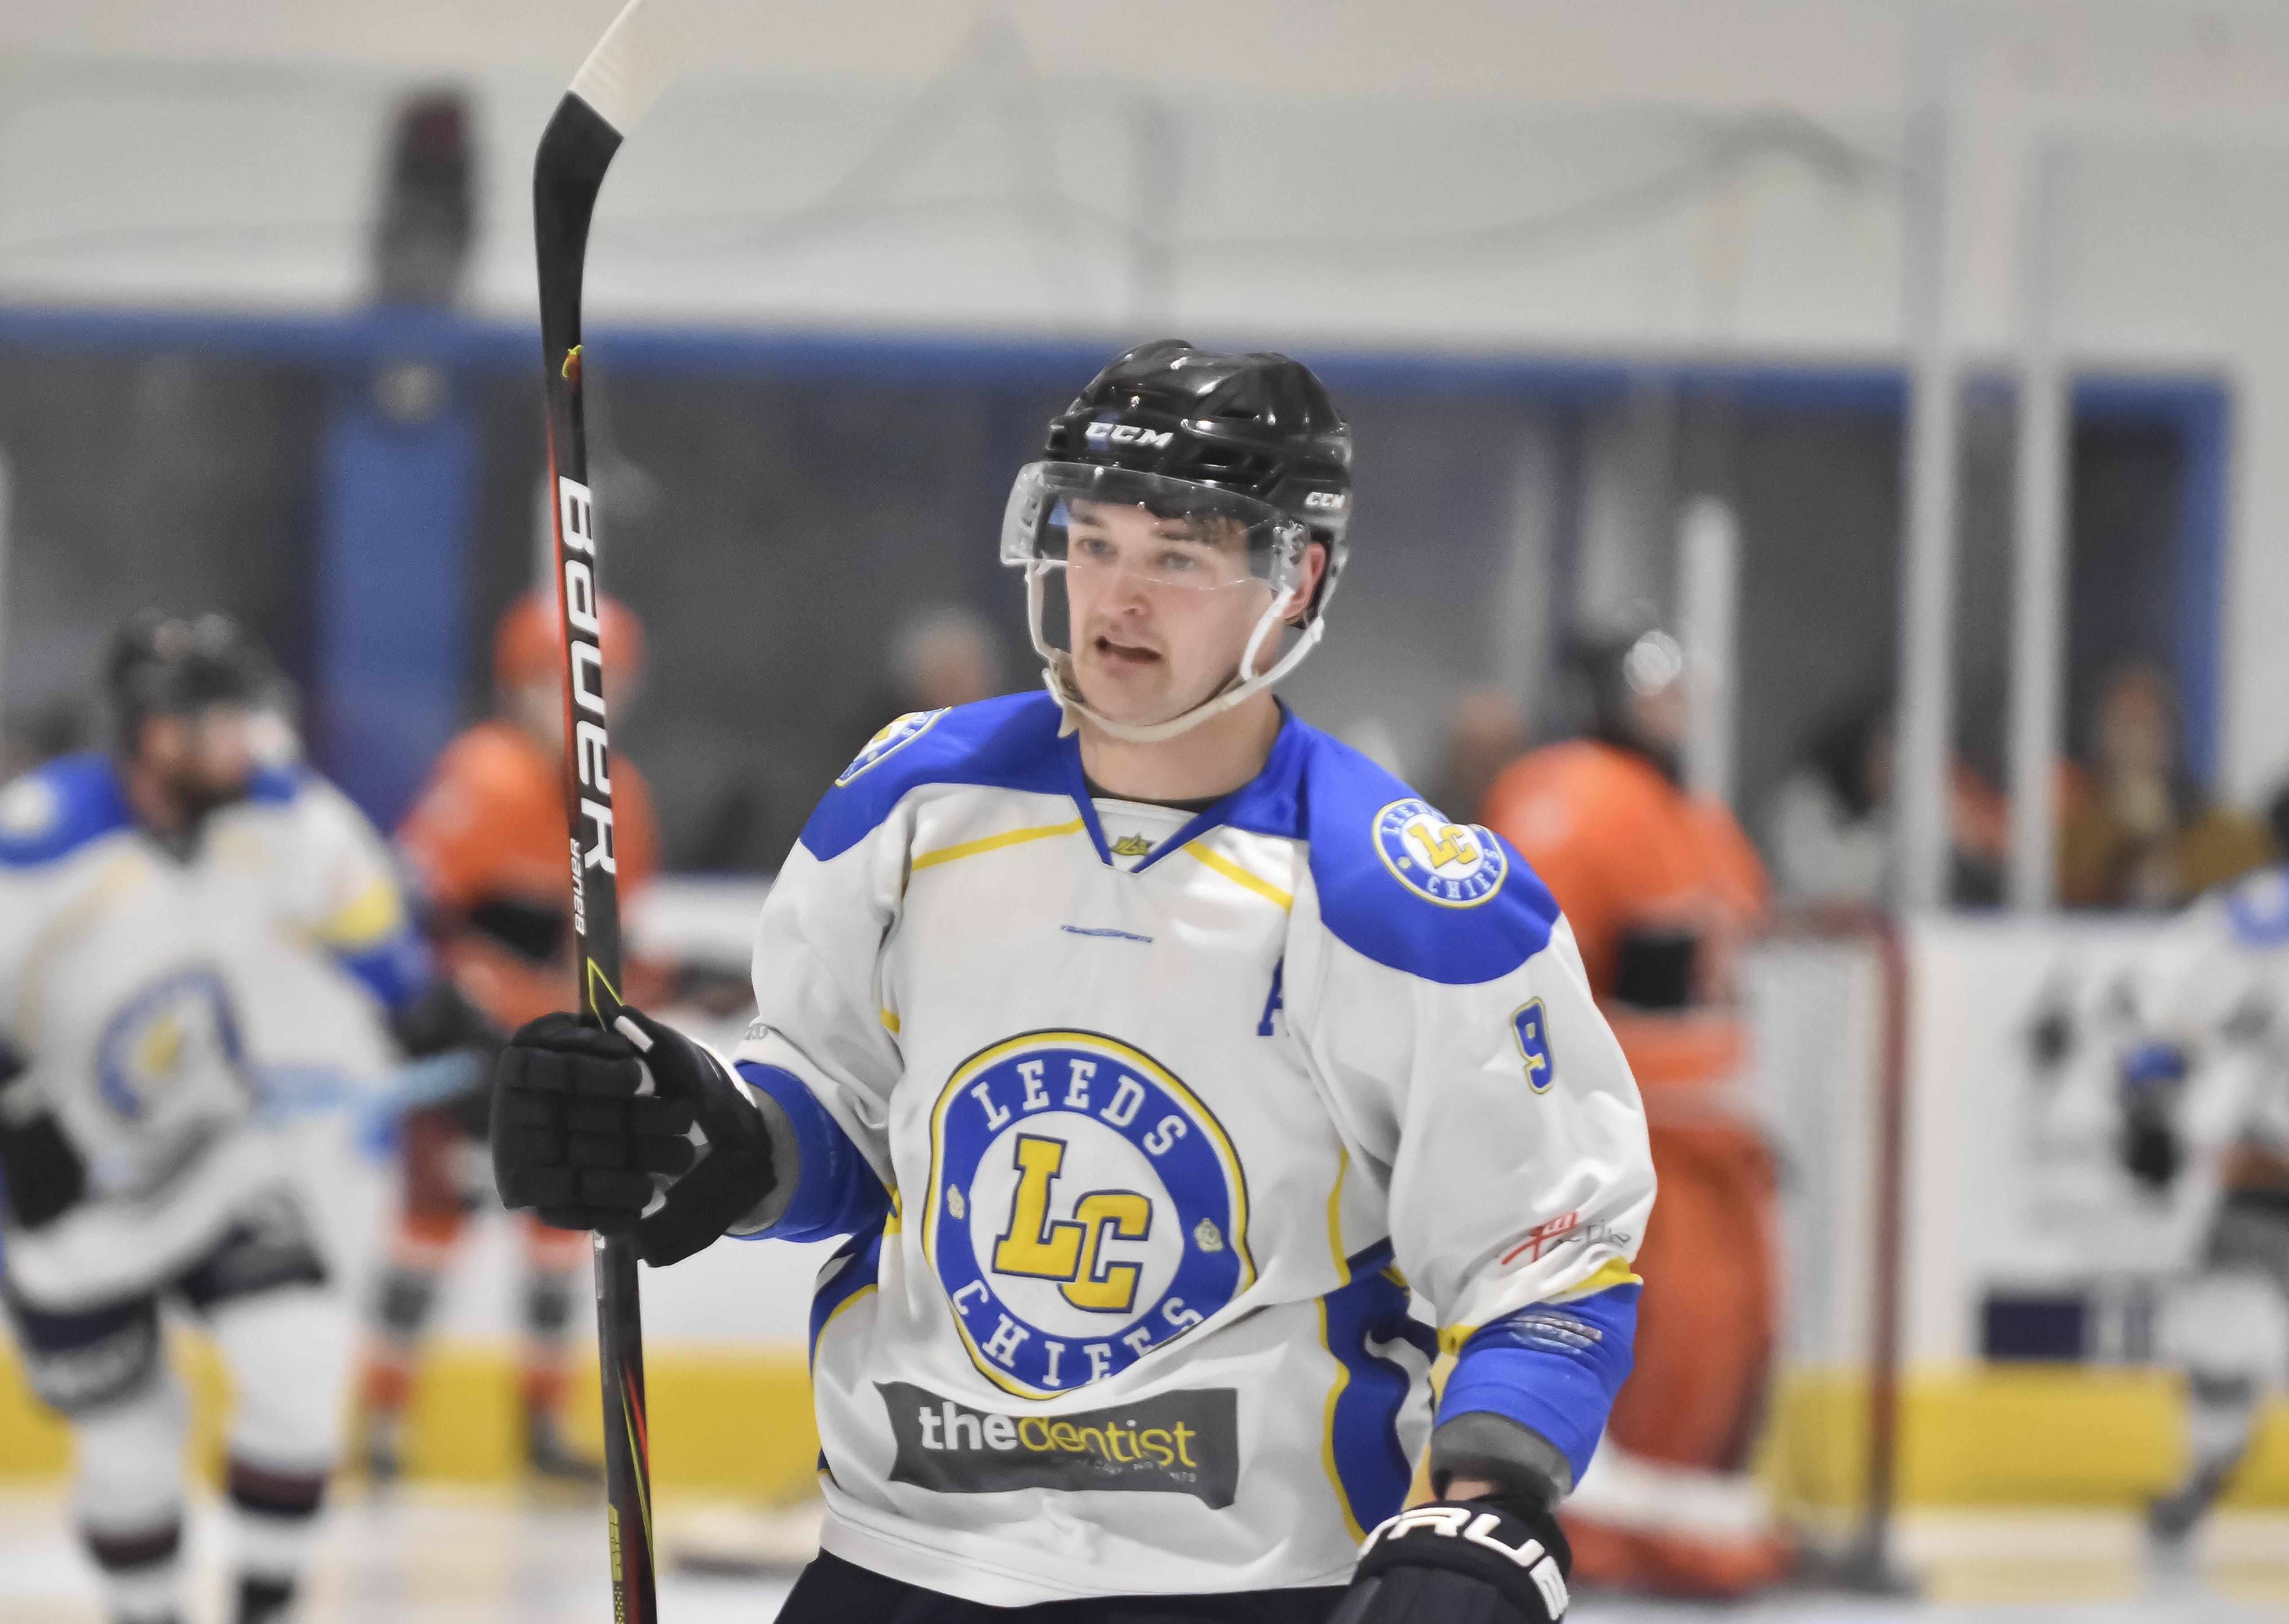 Joe Coulter scored his second in as many matches to get Leeds Chiefs up and running against Milton Keynes on Saturday night. Picture courtesy of Steve Brodie.